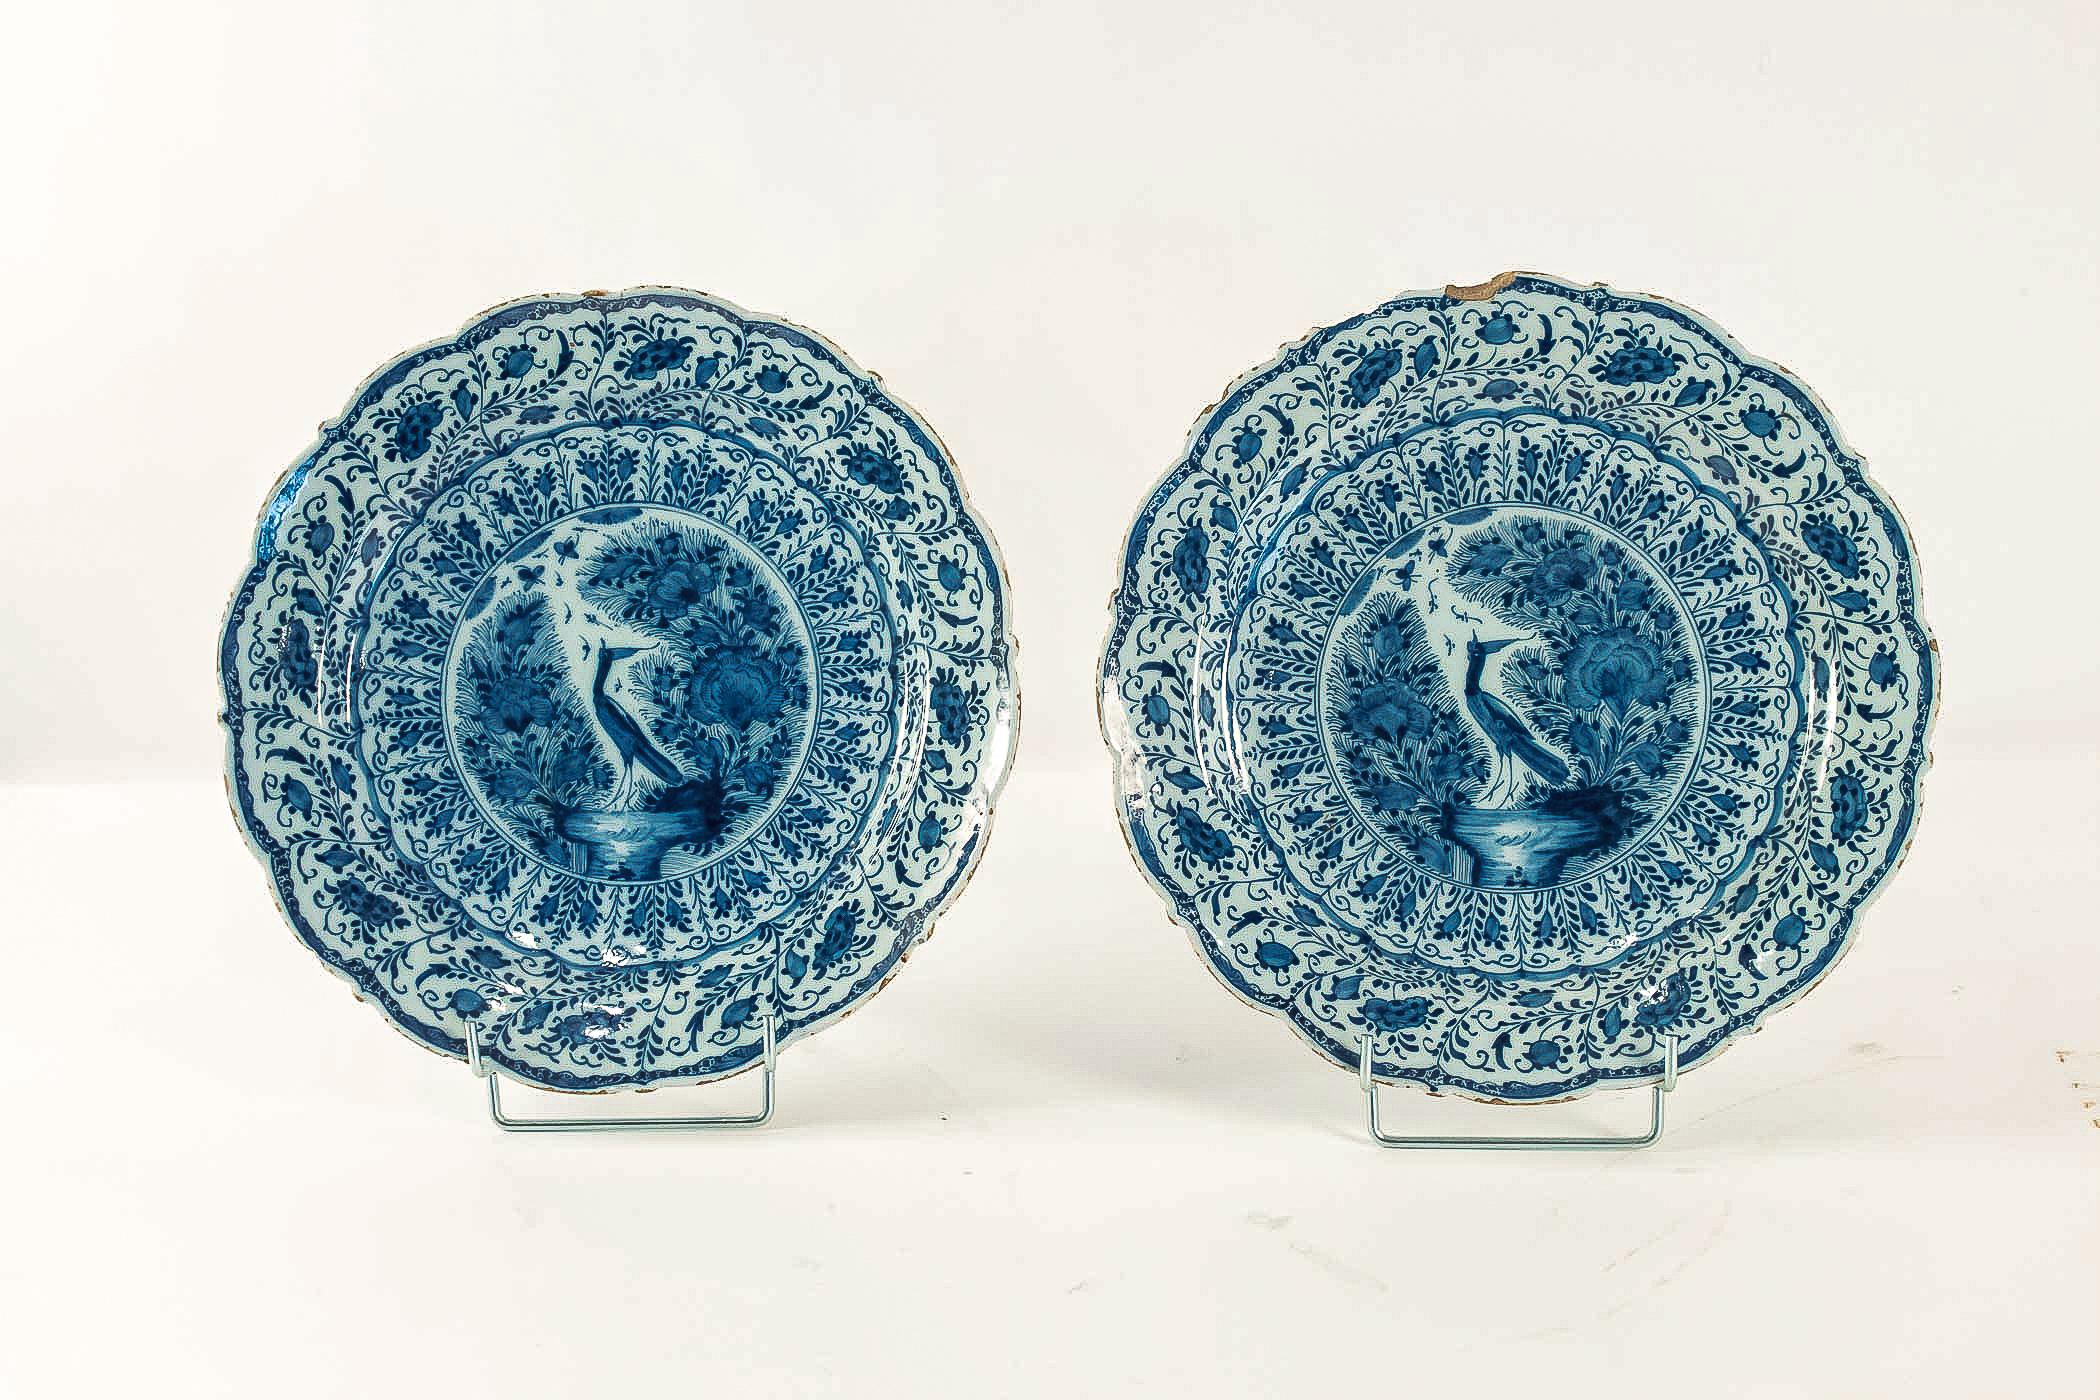 Sign by Ax, Mid-18th Century, Magnificent Pair of Faience Delft Round Dishes 2